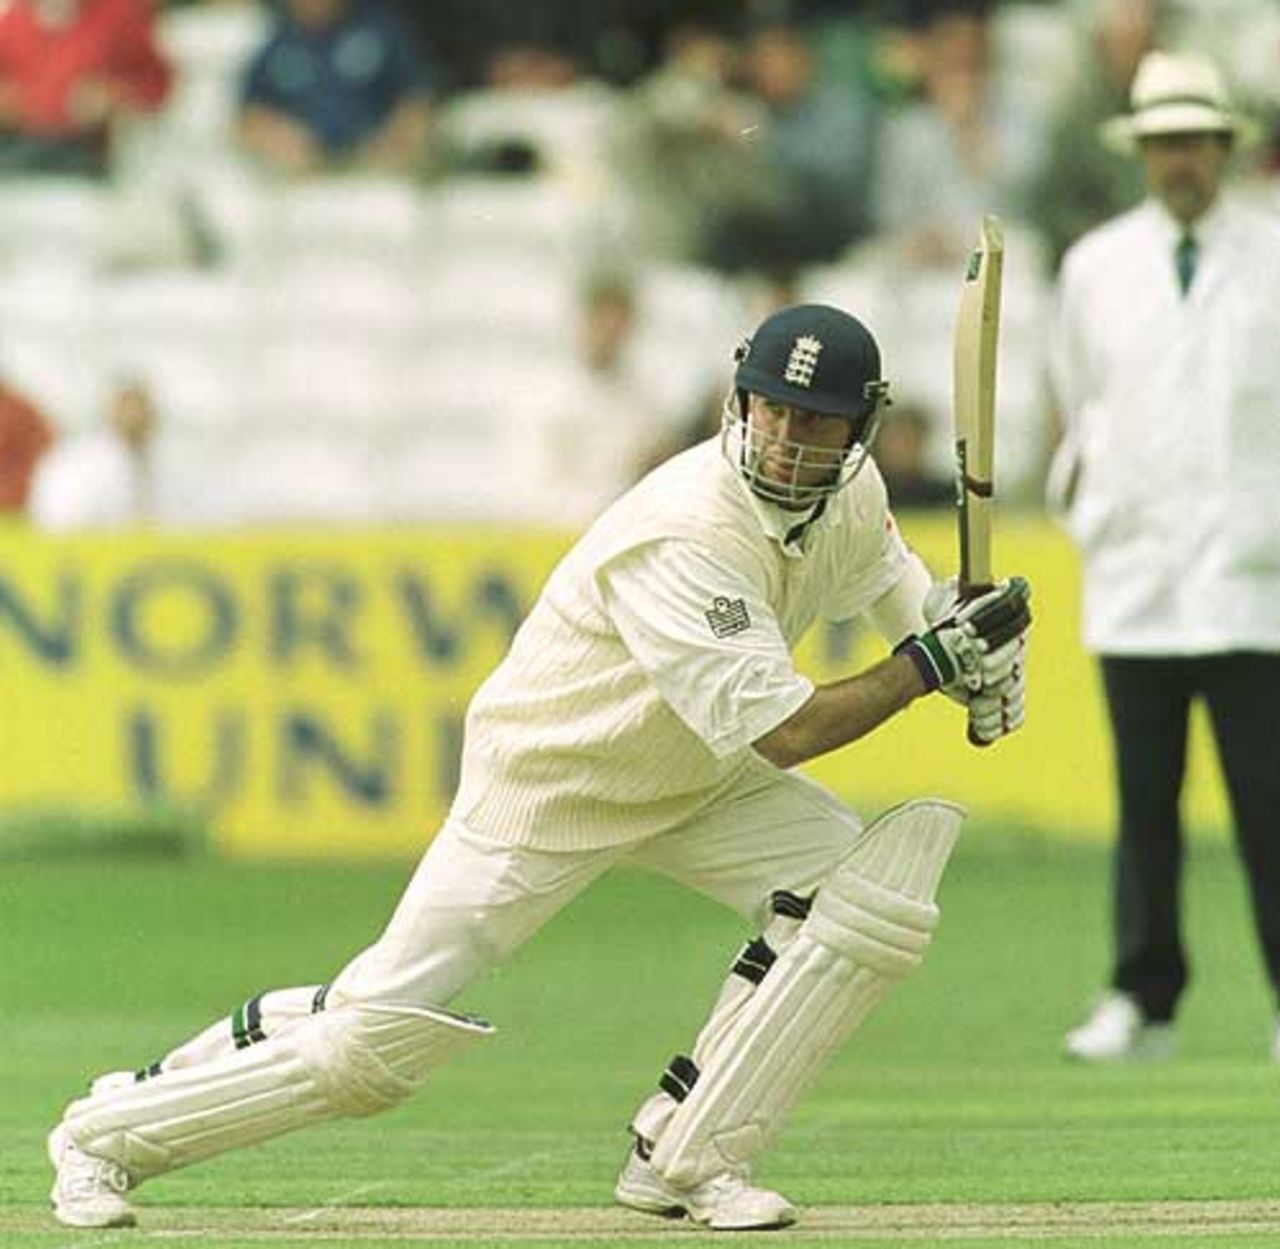 Michael Vaughan square-drives the ball,day 2, 2nd Test at Old Trafford, 17-21 May 2001.